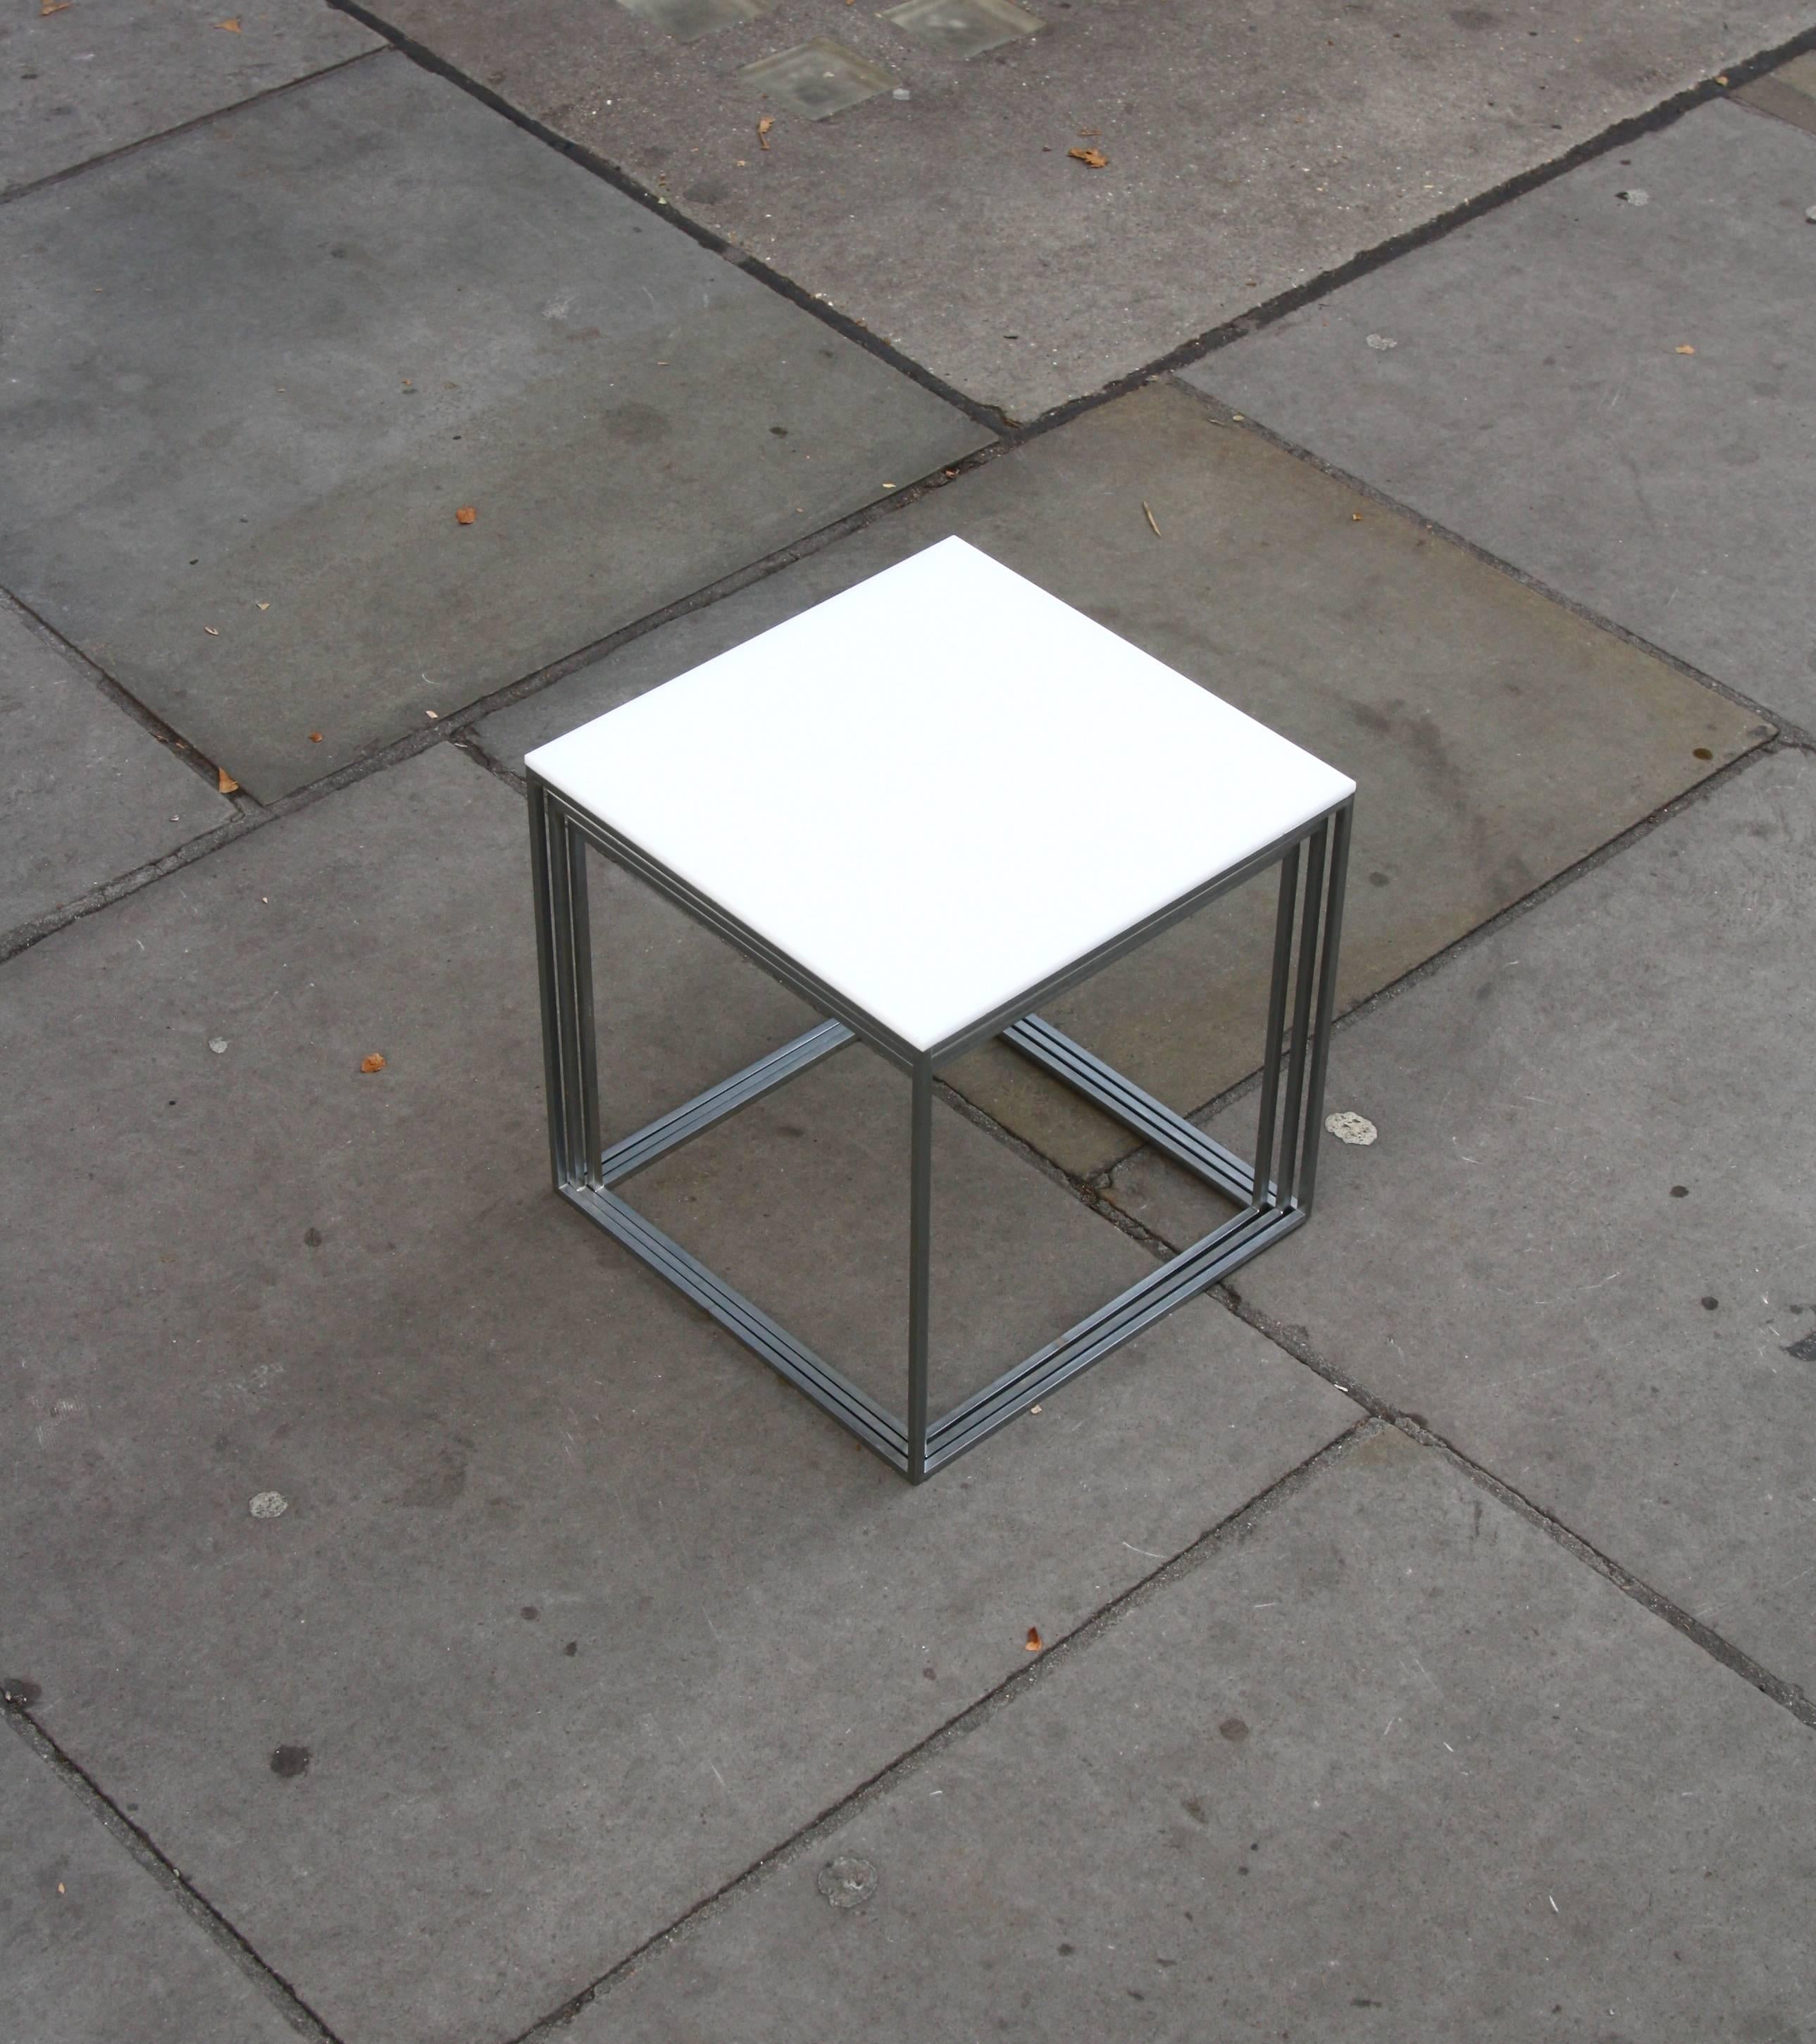 A complete vintage set of three PK71 nesting tables designed by Poul Kjærholm in 1957, manufactured by his friend E. Kold Christensen.

A true triumph in Minimalist design the side tables are simply three slender steel frame cubes fitted with